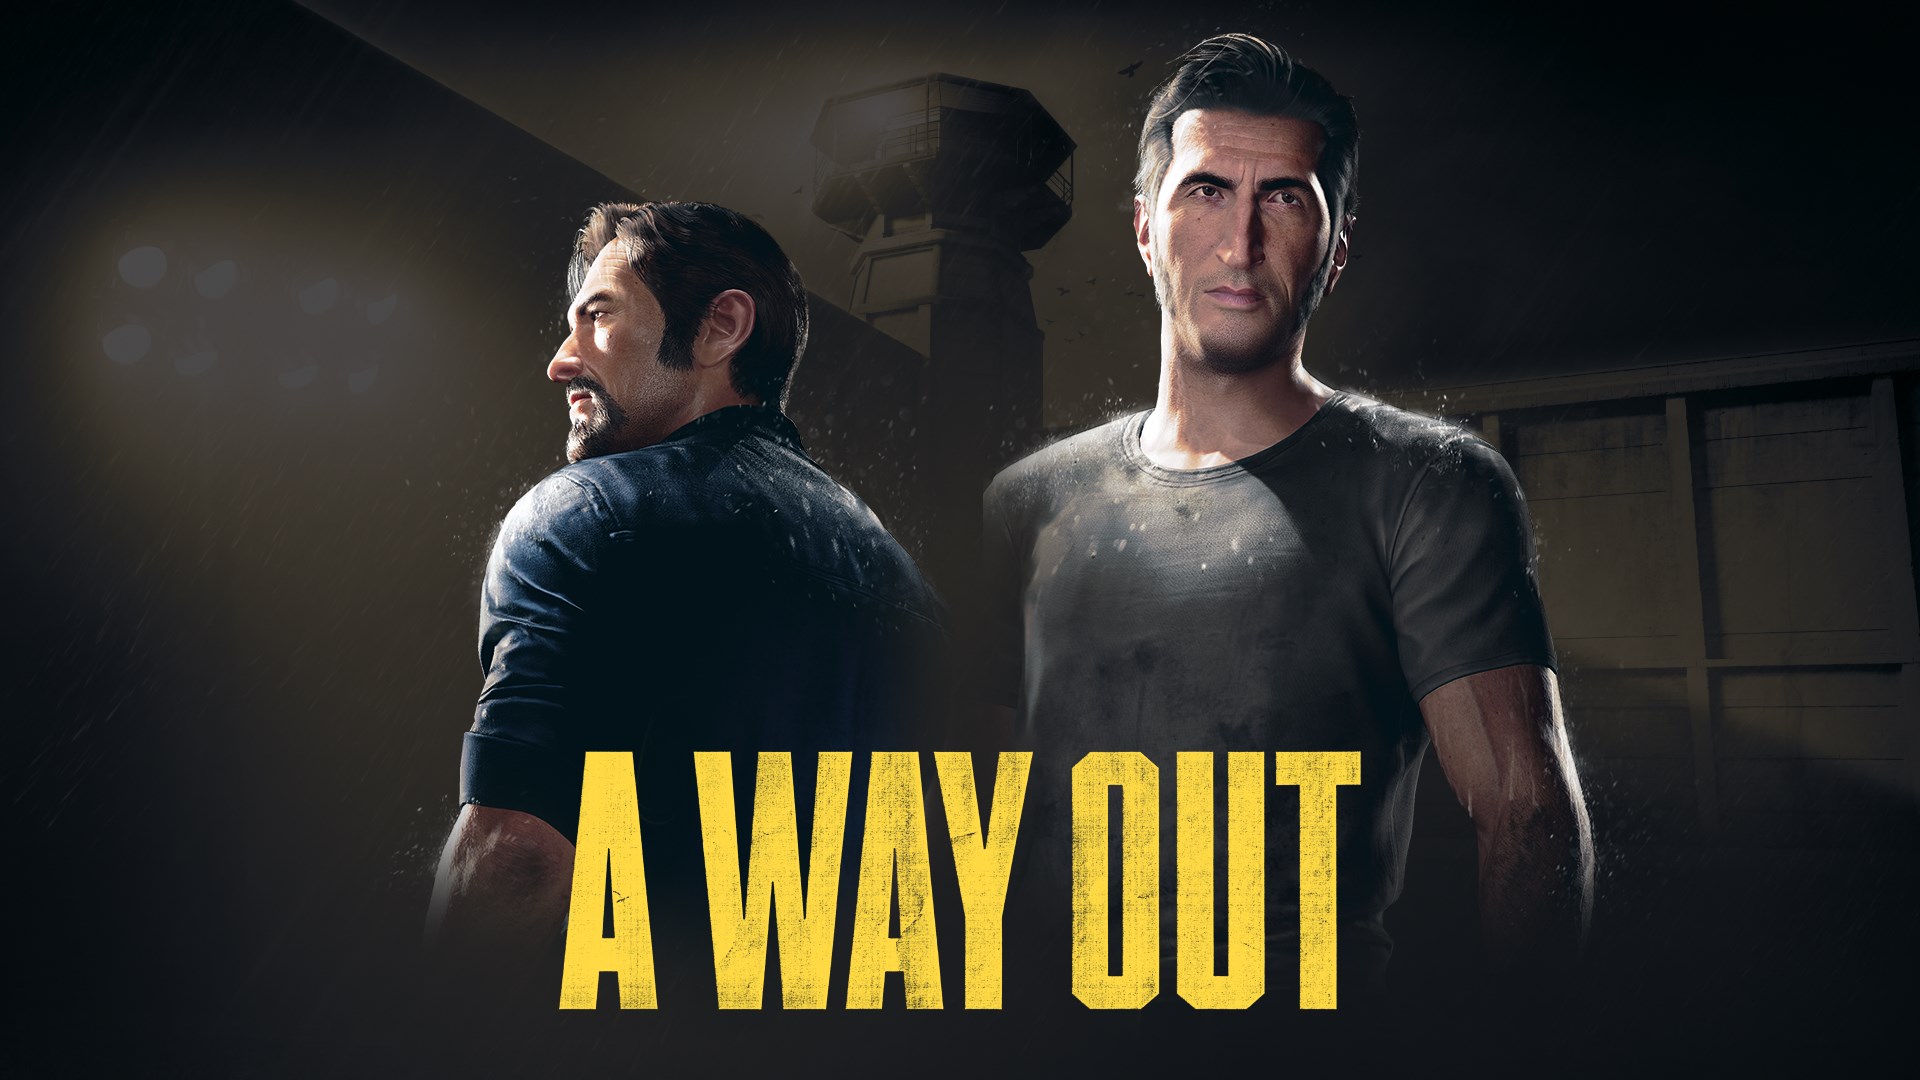 a way out xbox price